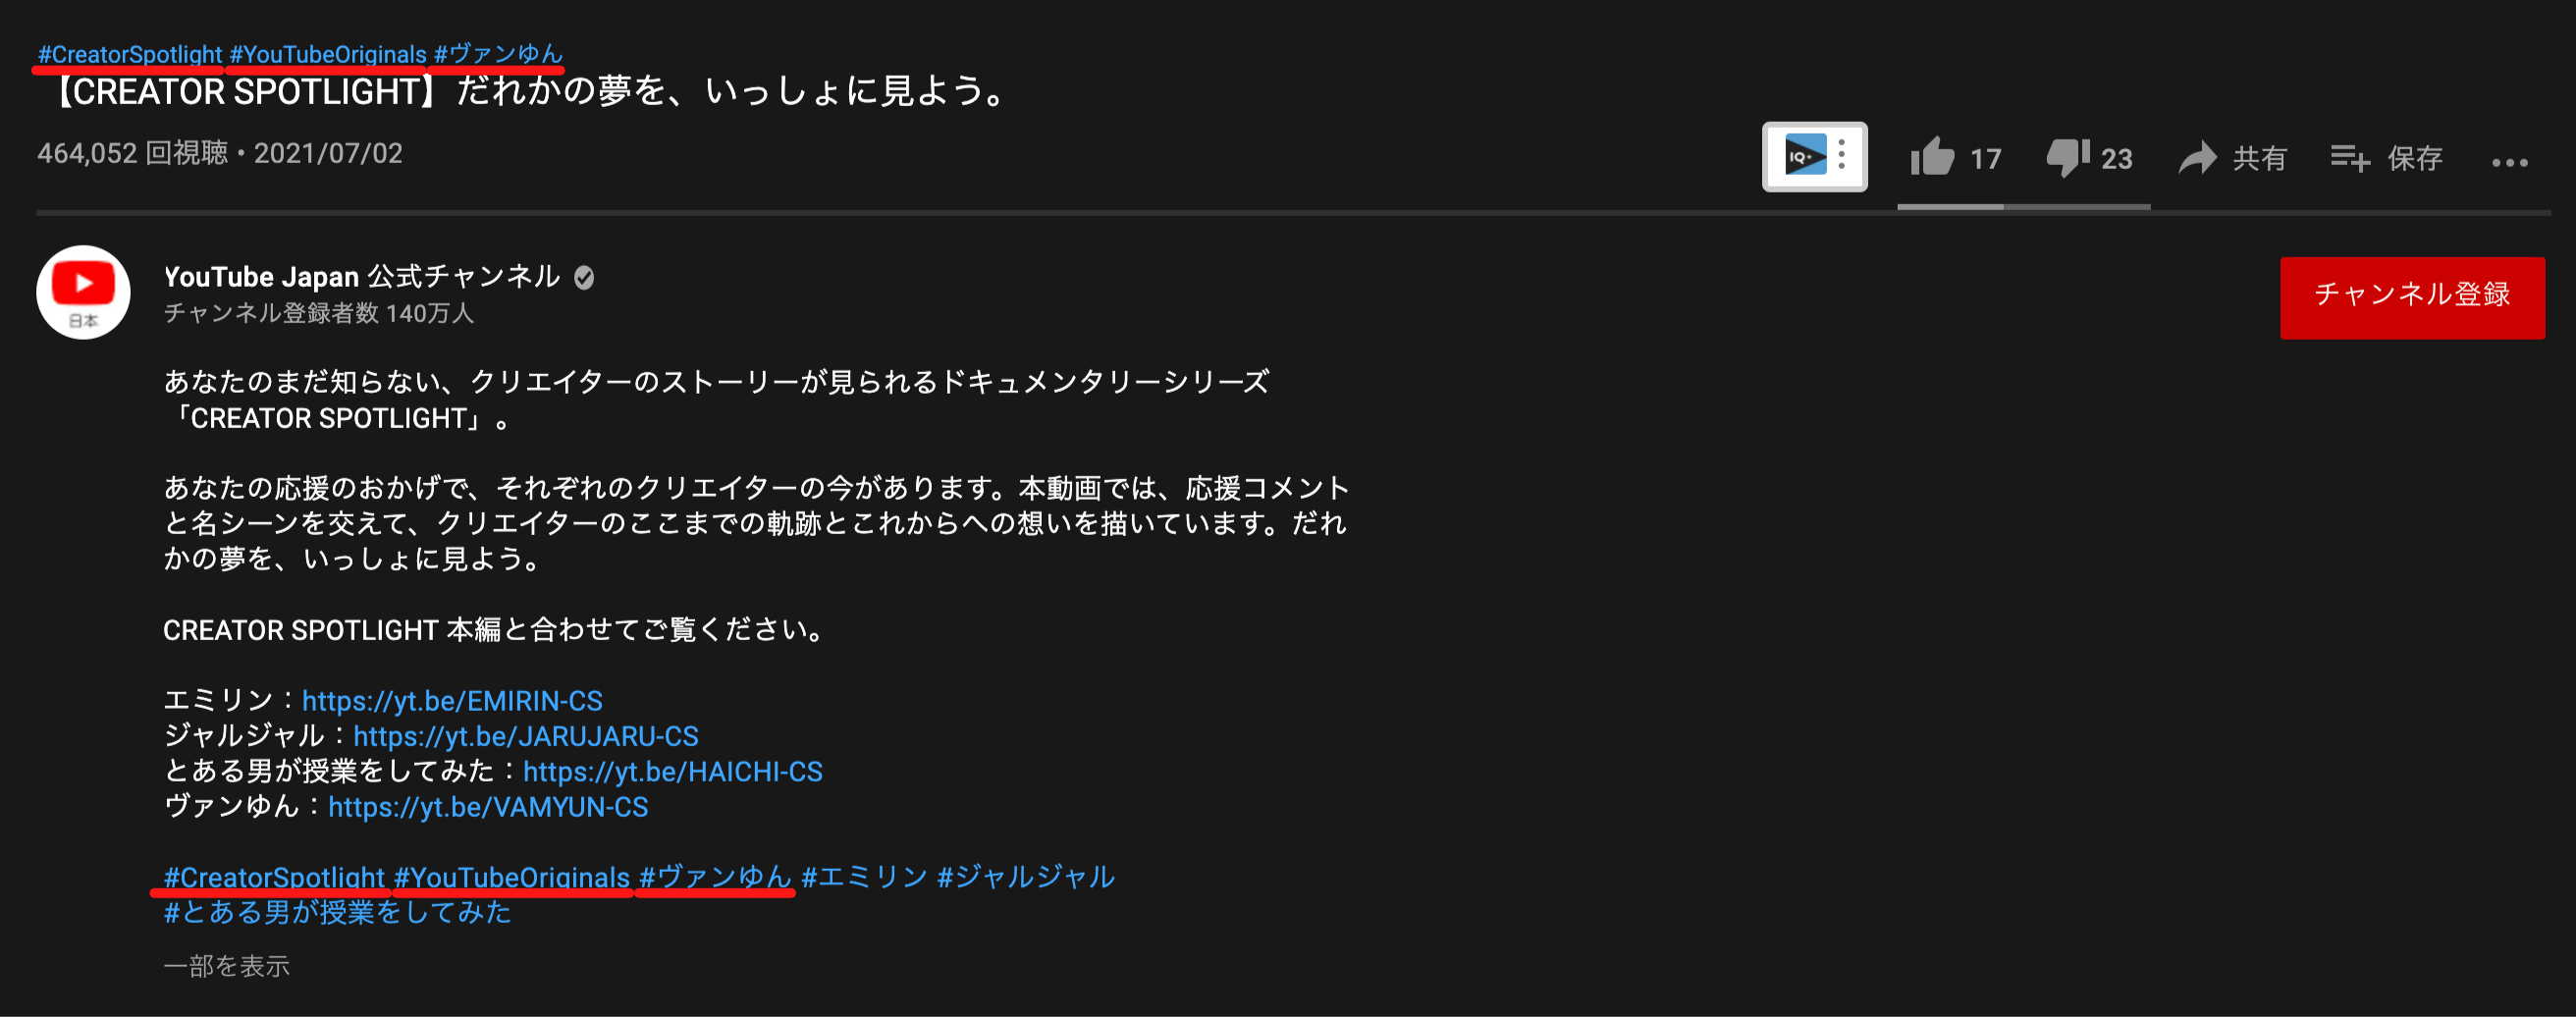 youtube-japan official channnel-hashtag